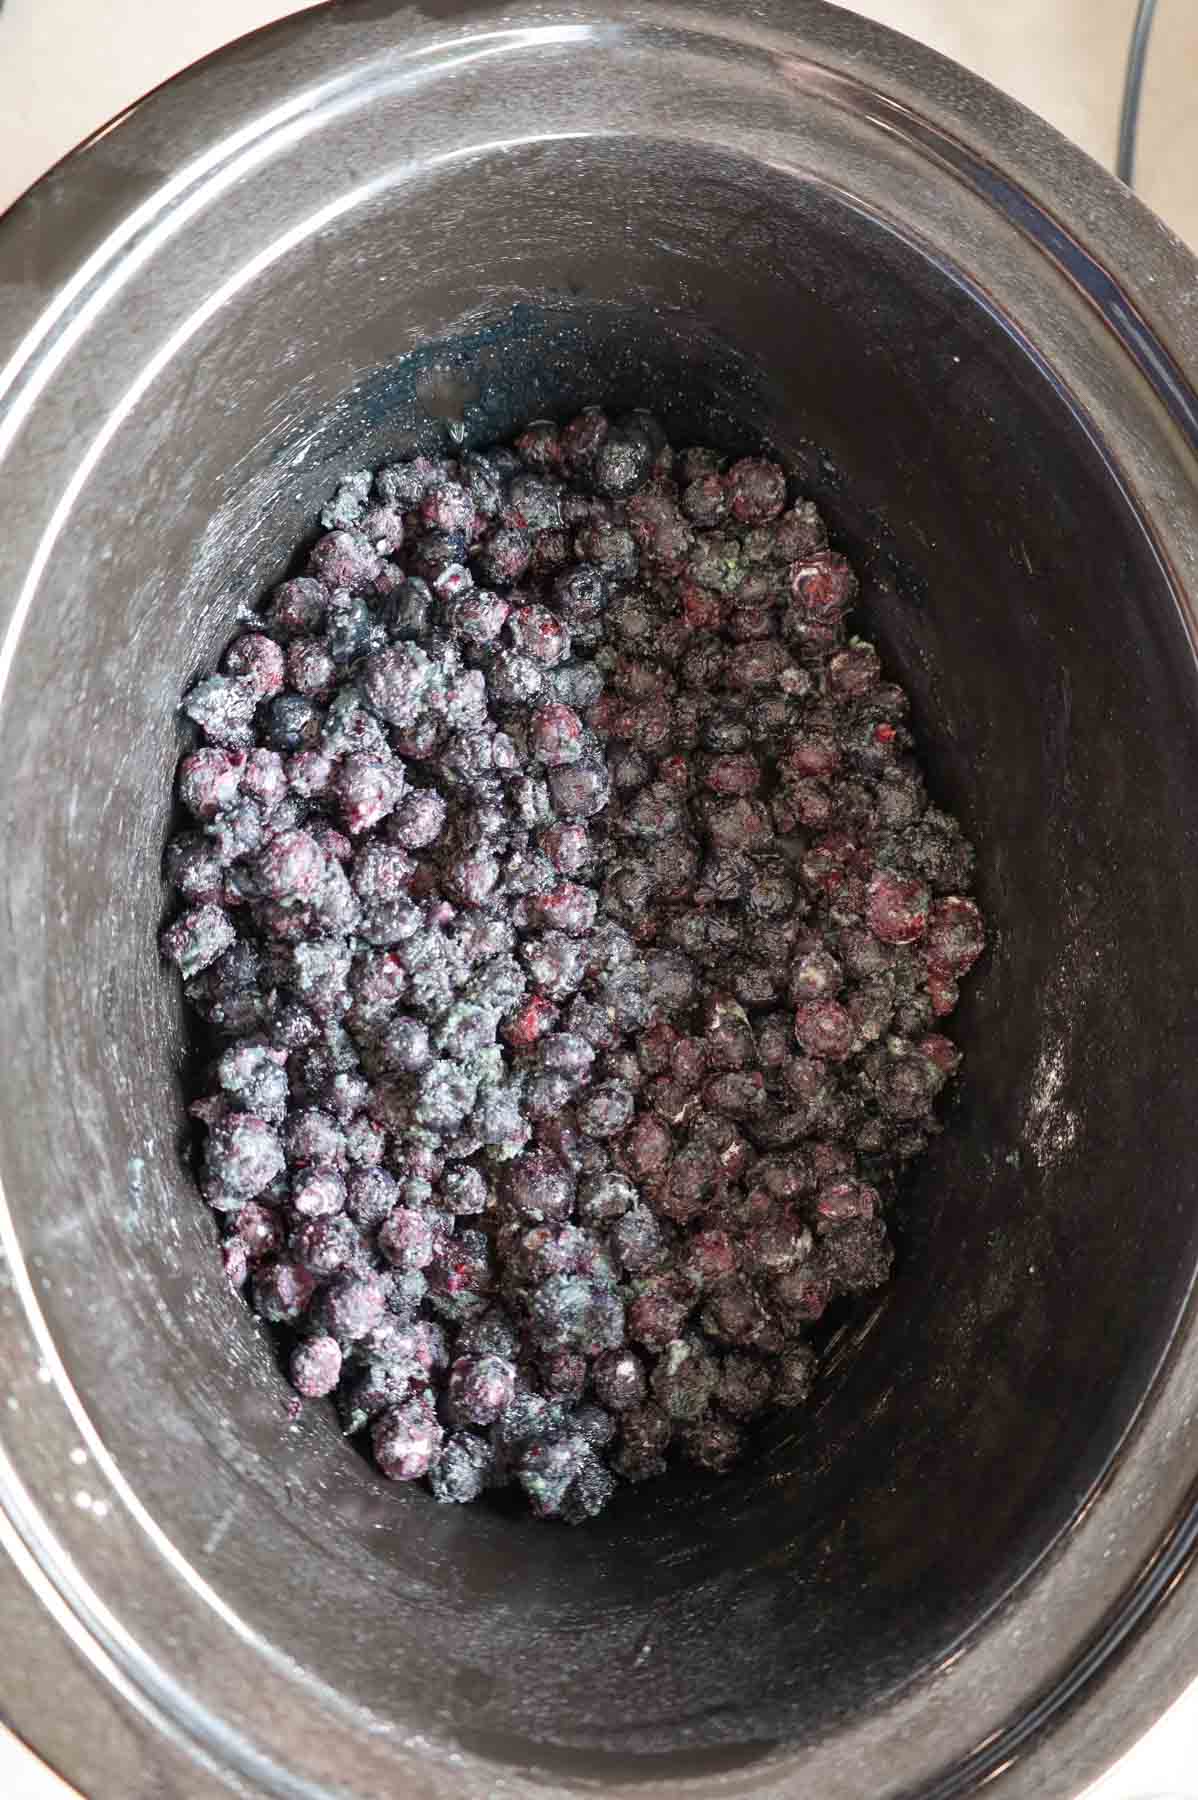 frozen blueberries, pudding mix and sugar stirred together in a crock pot